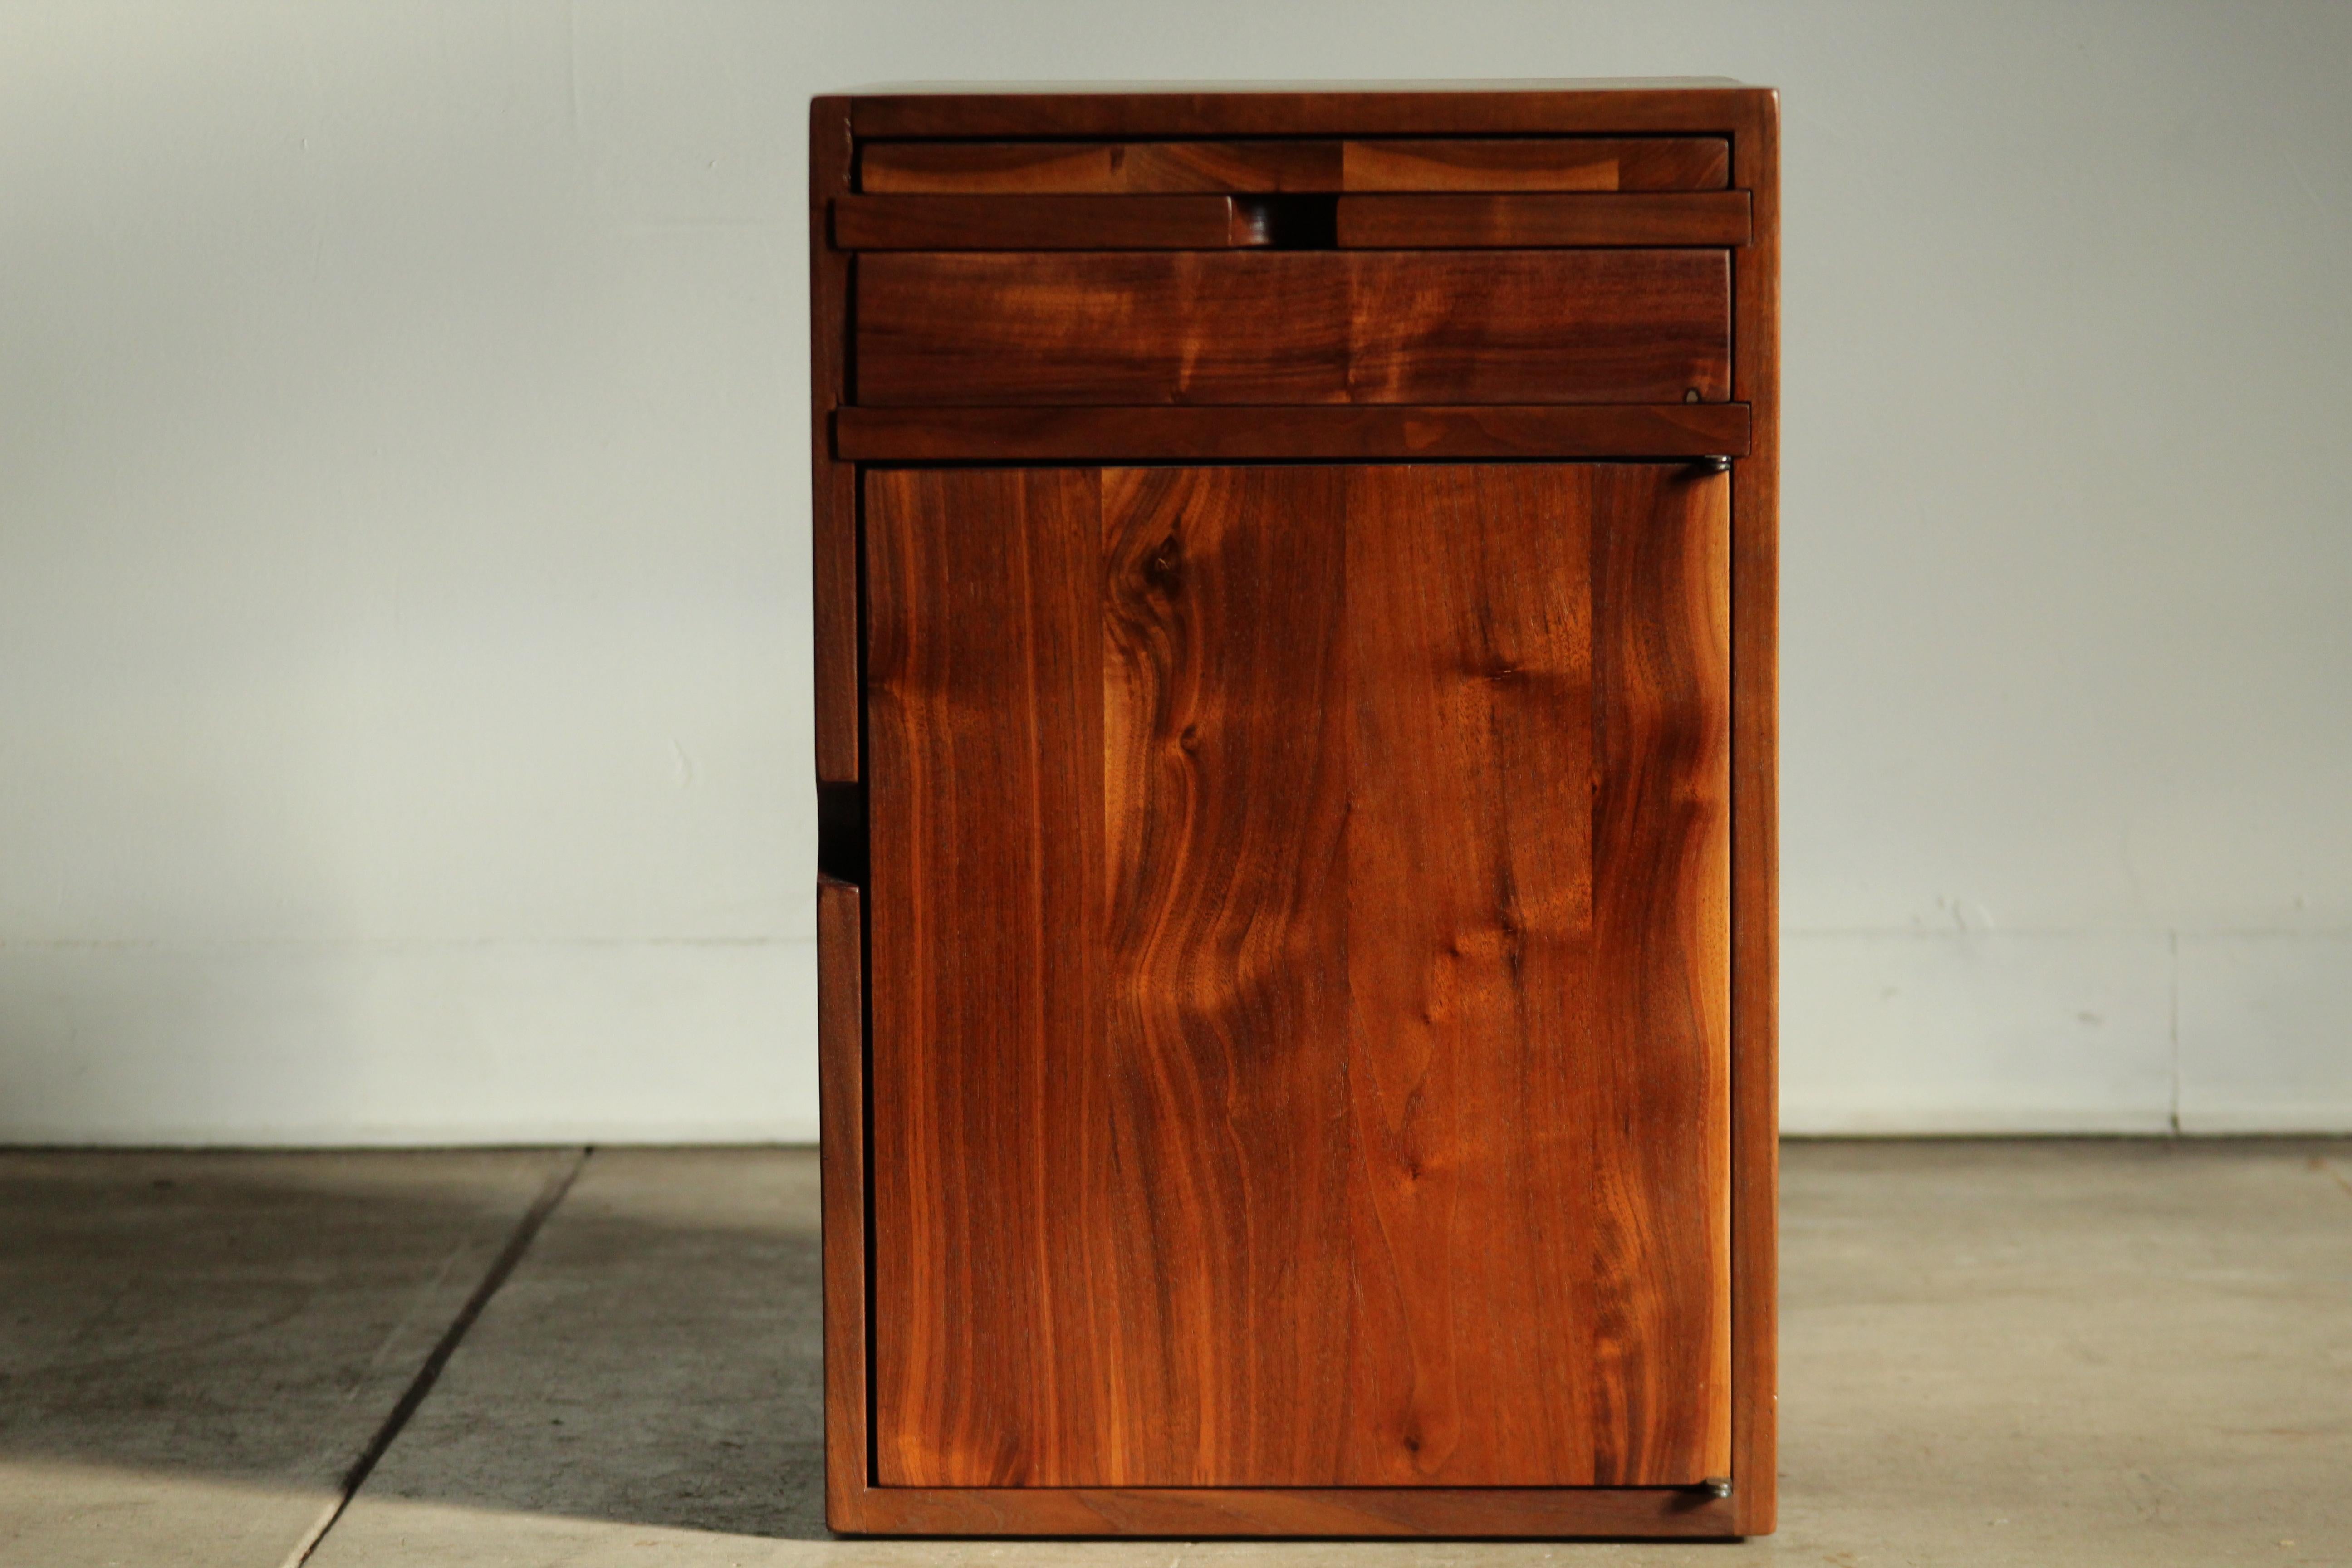 A stunning, studio crafted end table constructed of solid Claro walnut, made by an unknown designer in the 1970s. The table features a large storage area, a small drawer and a pull out tray for a drink, book, bong, etc. This piece has been lovingly